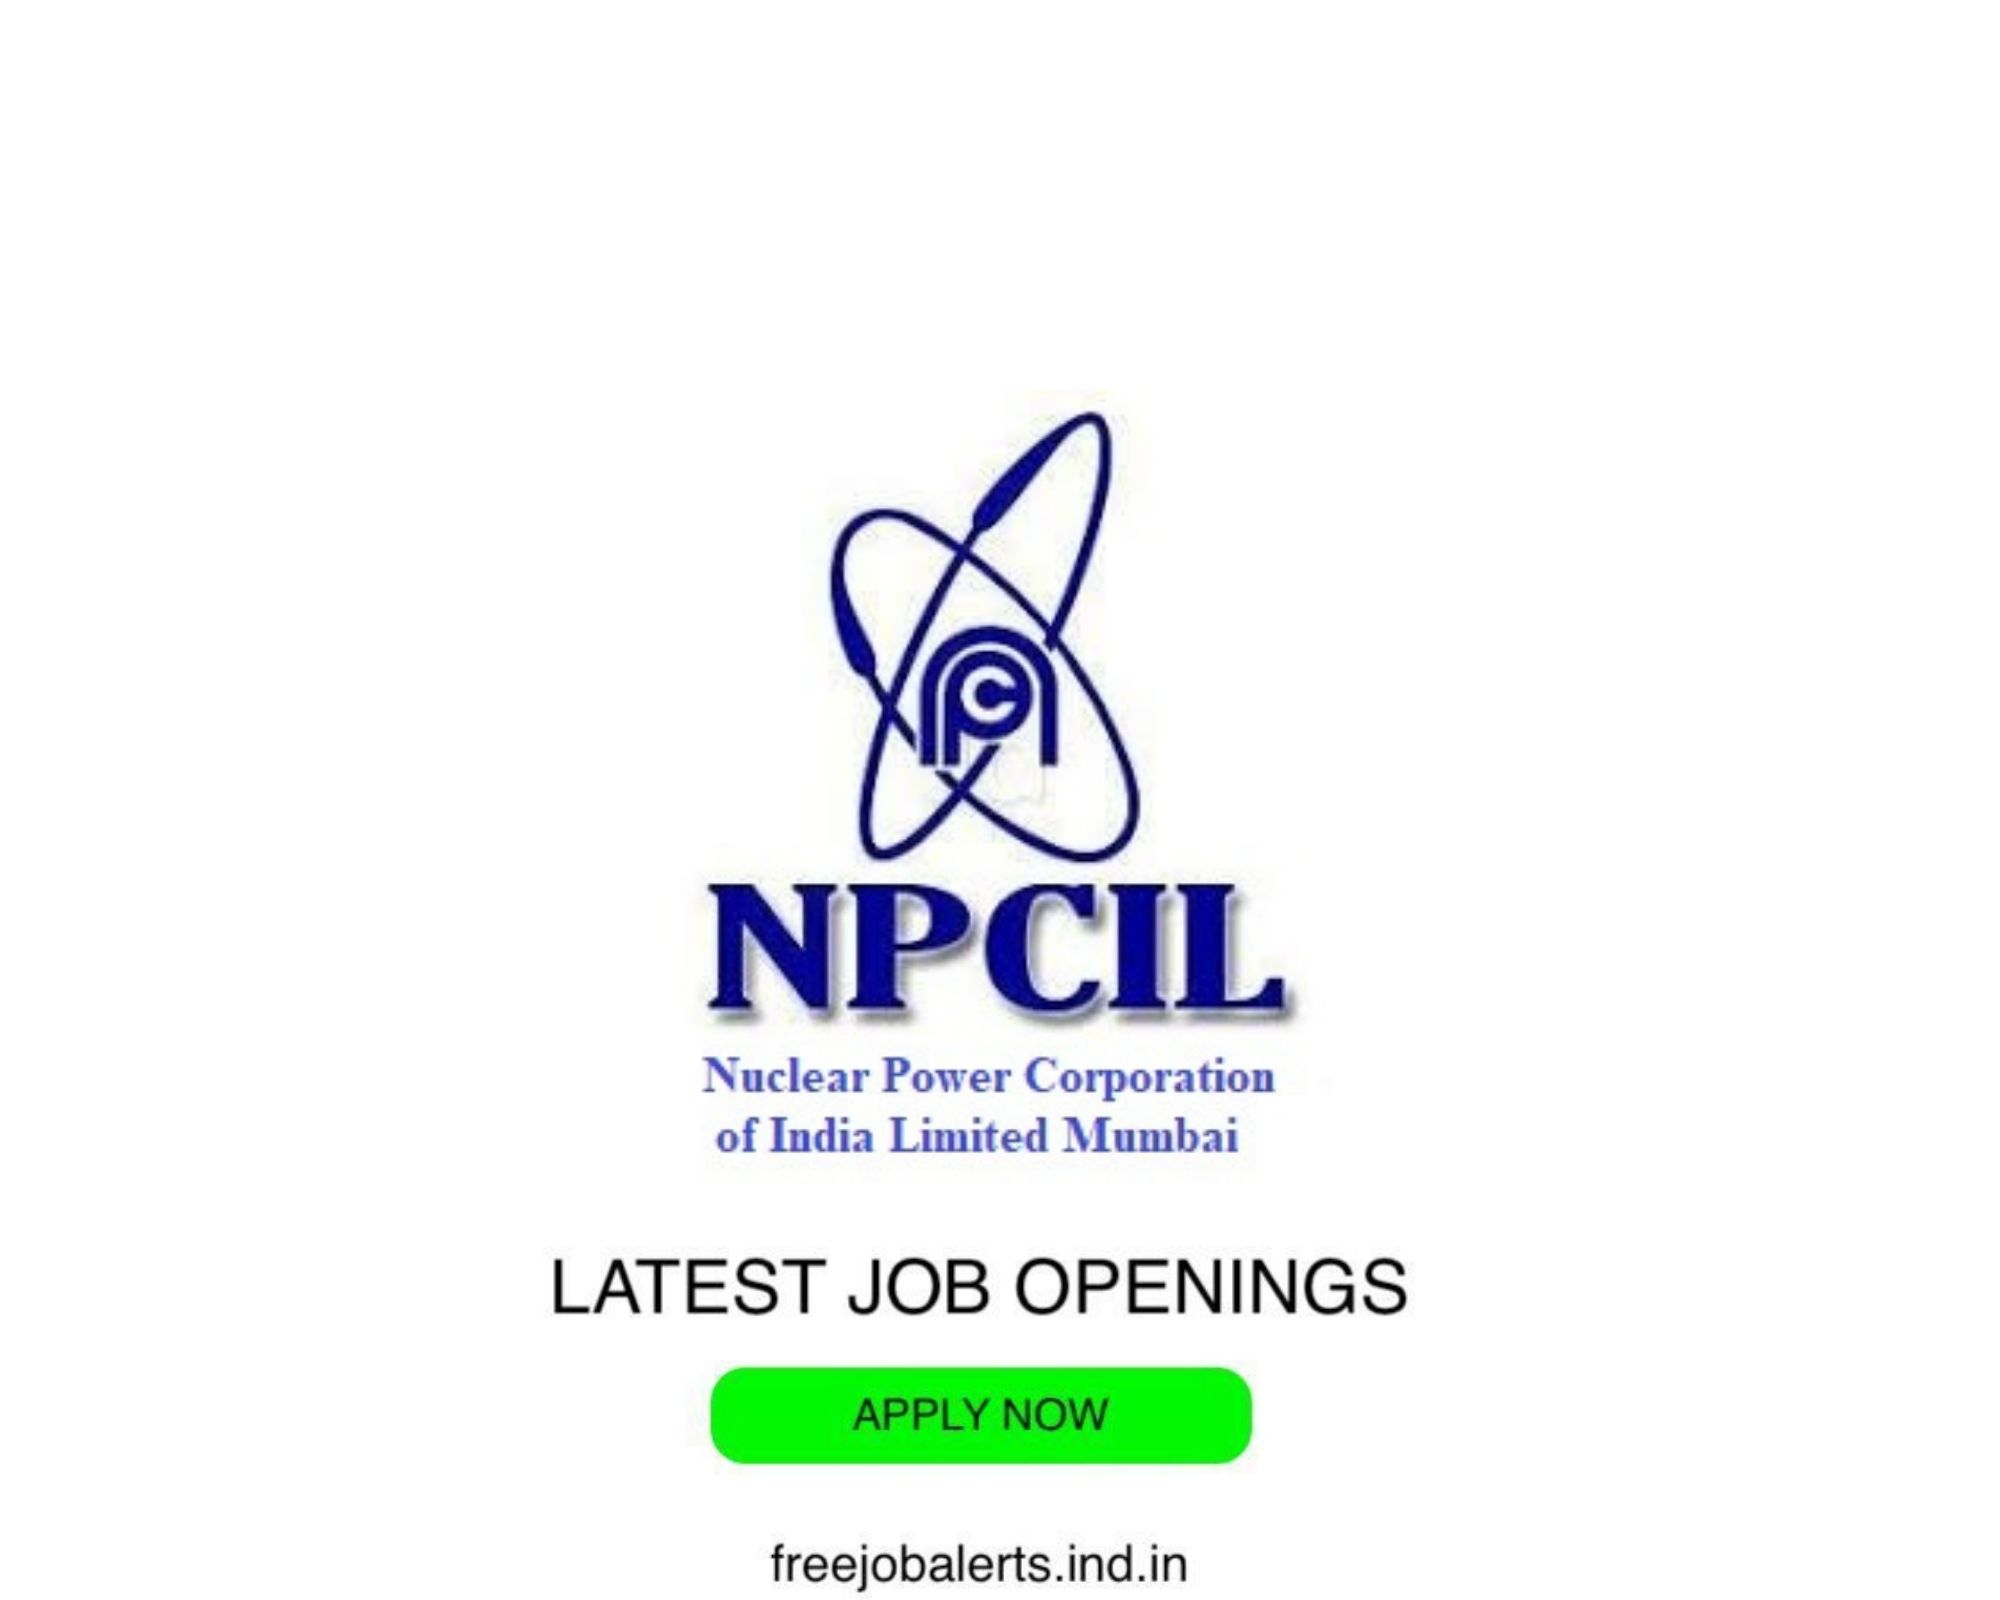 NPCIL - Nuclear Power Corporation of India Limited- Latest Govt job openings - Free job alerts, Indian Govt Jobs